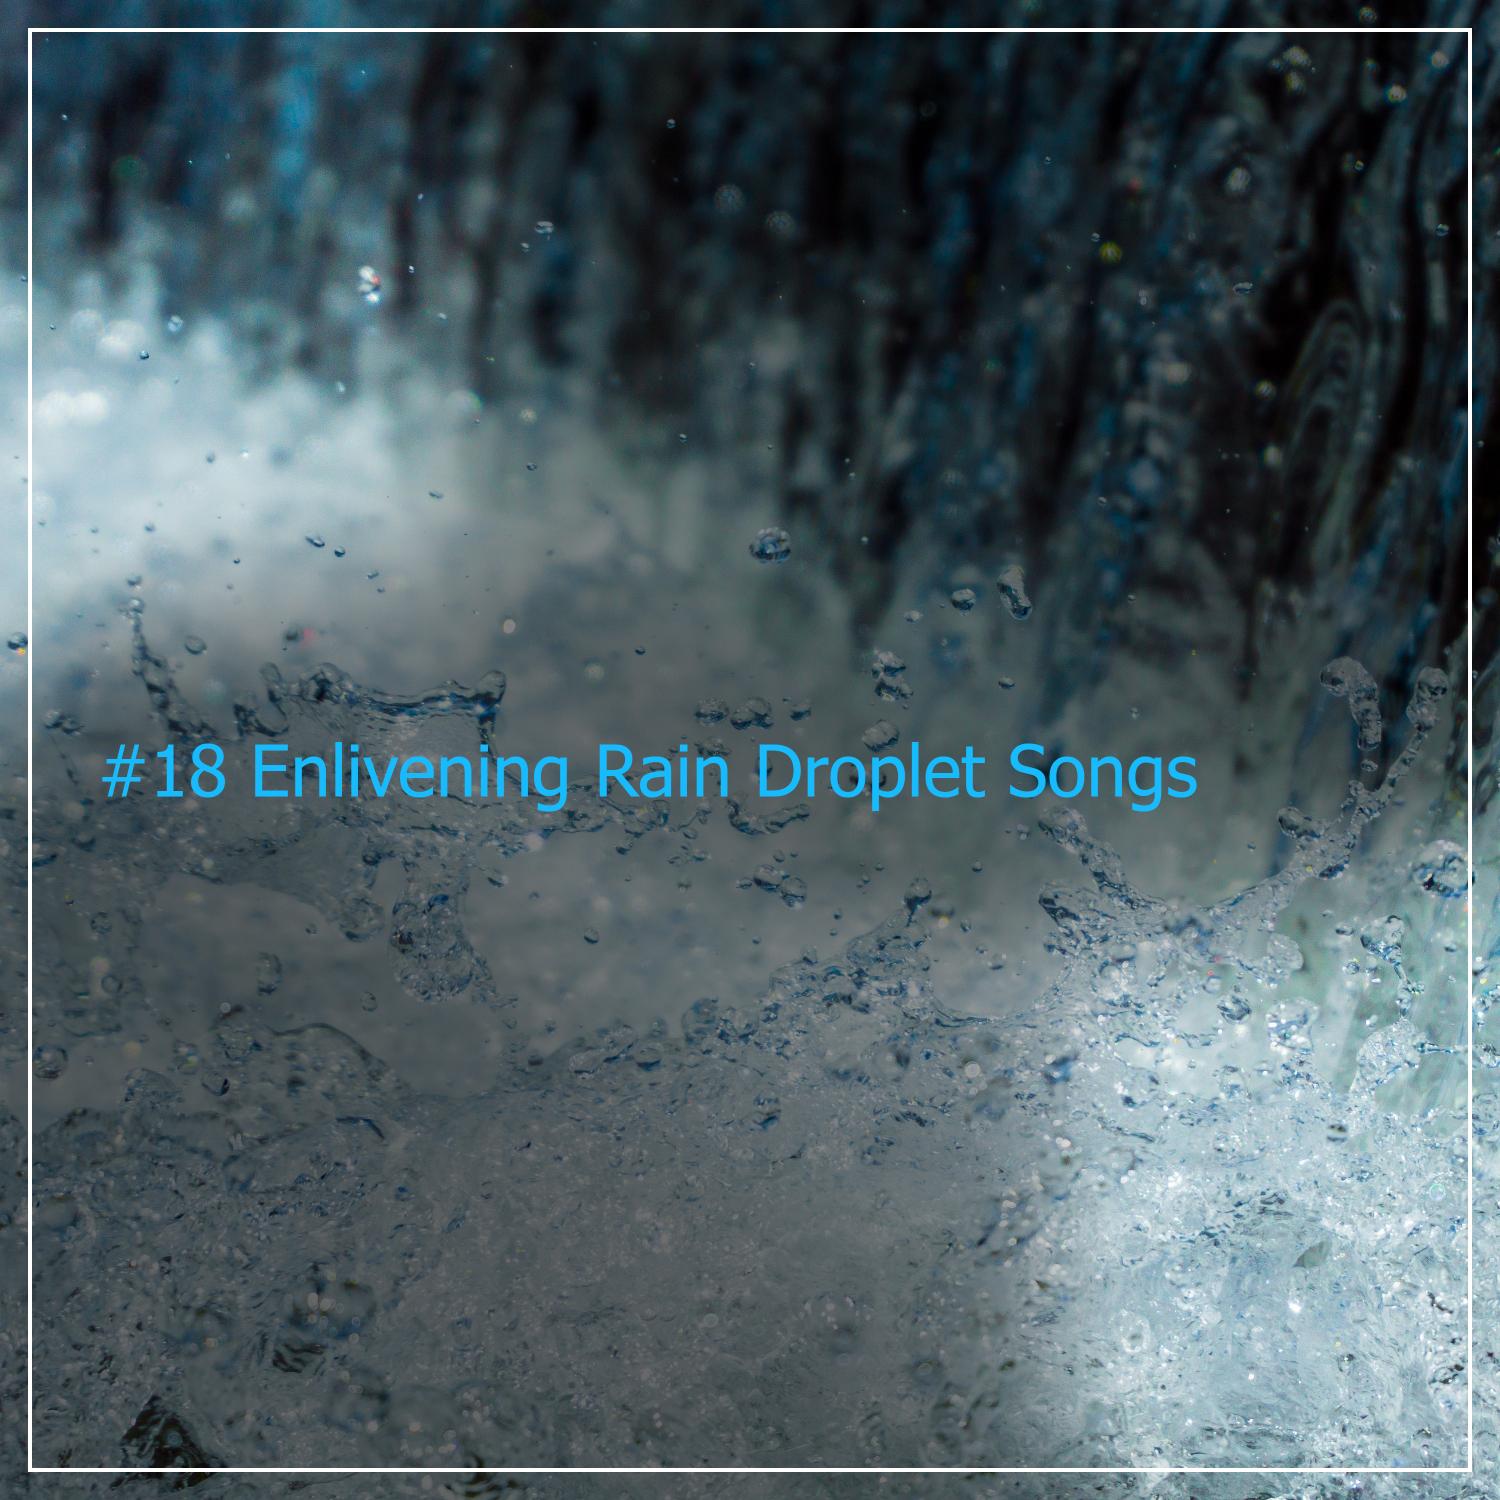 #18 Enlivening Rain Droplet Songs from Nature